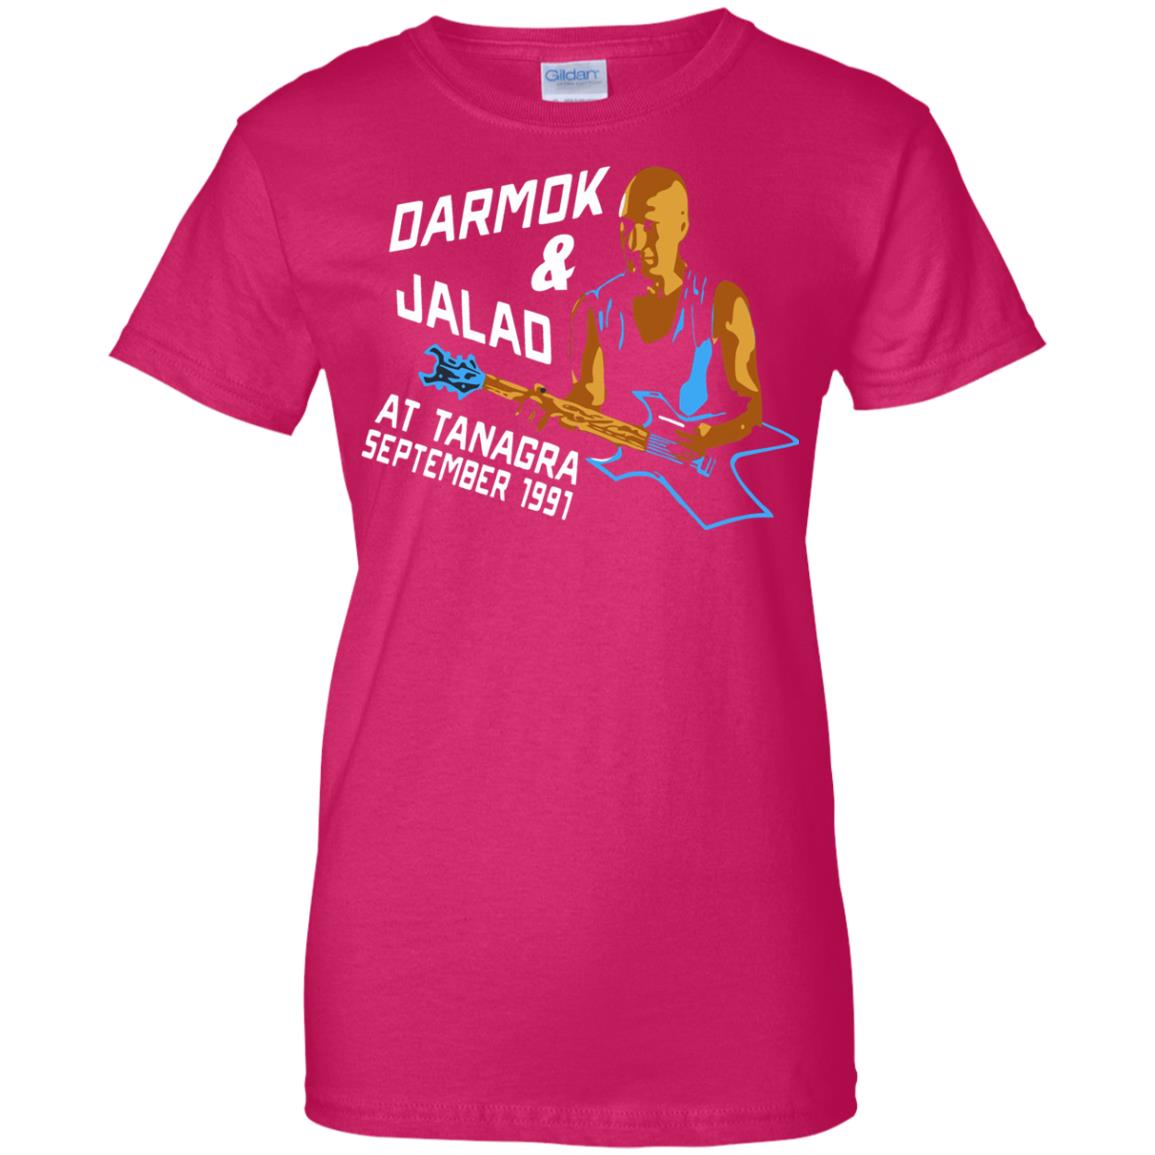 darmok and jalad at tanagra womens t shirt - lady t shirt - pink heliconia